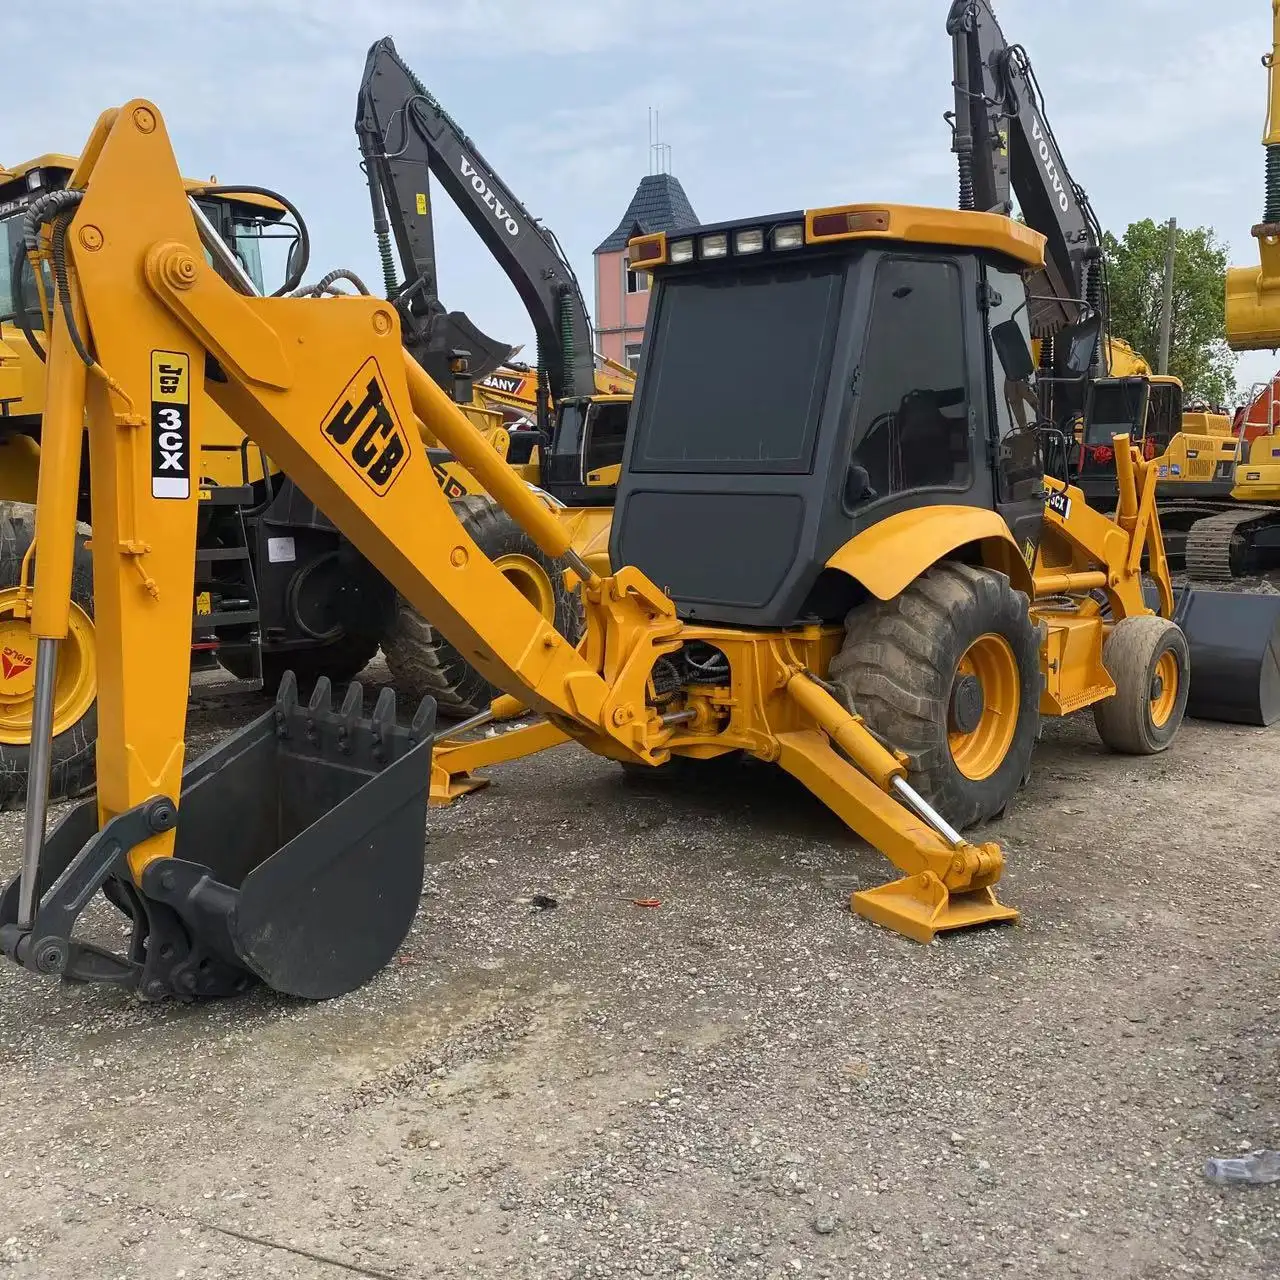 Hot selling second-hand backhoe excavators JCB 3CX with suitable prices available for sale